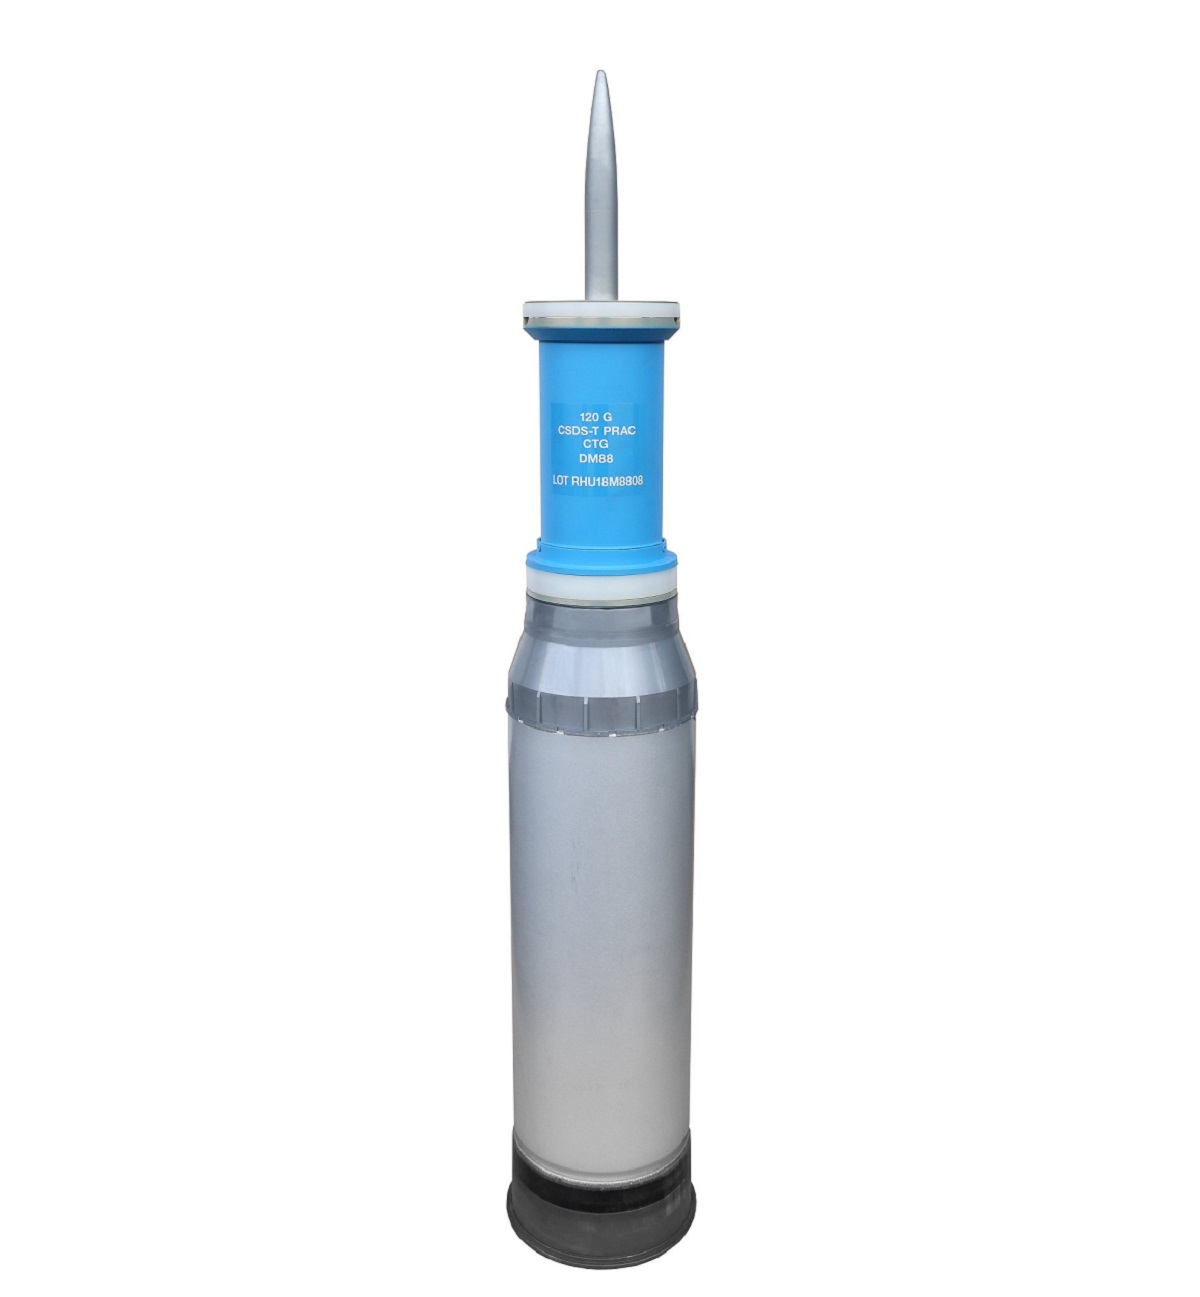 DM88 (120 mm TPCSDS-T, Target Practice, Cone Stabilized, Discarding Sabot â€“ Tracer) advanced practice round 